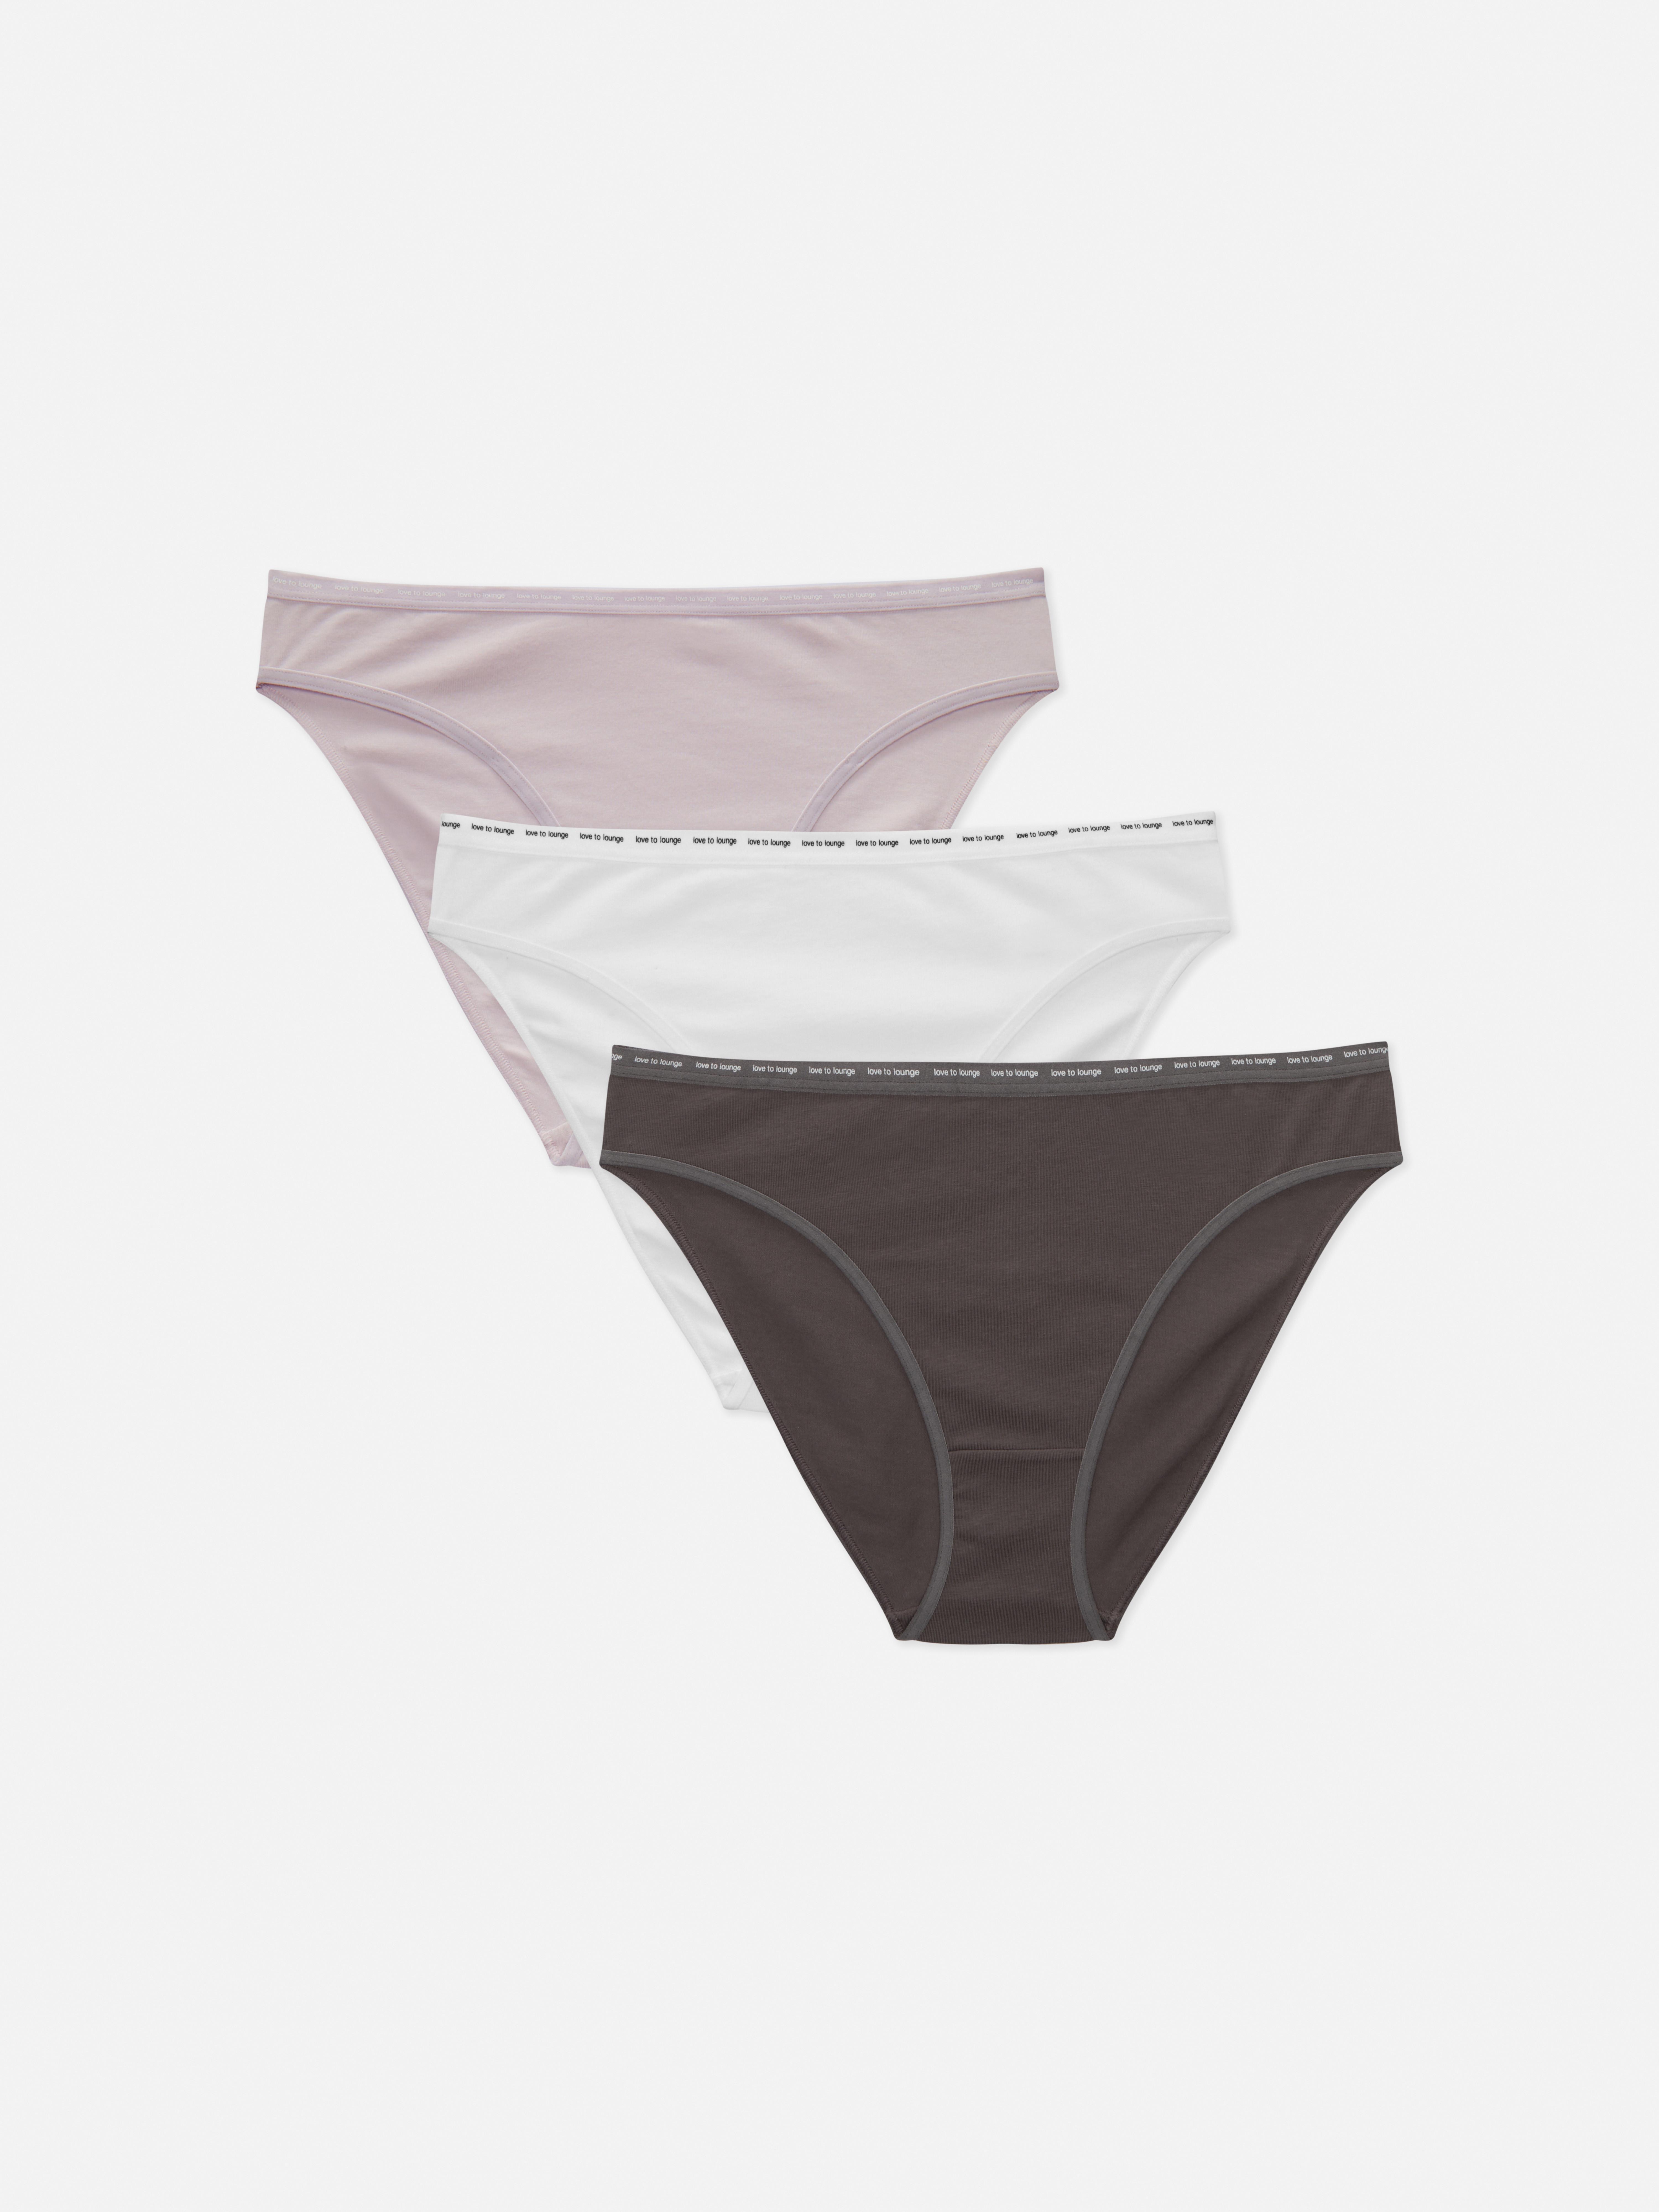 Primark on X: Sweet new additions for the underwear drawer